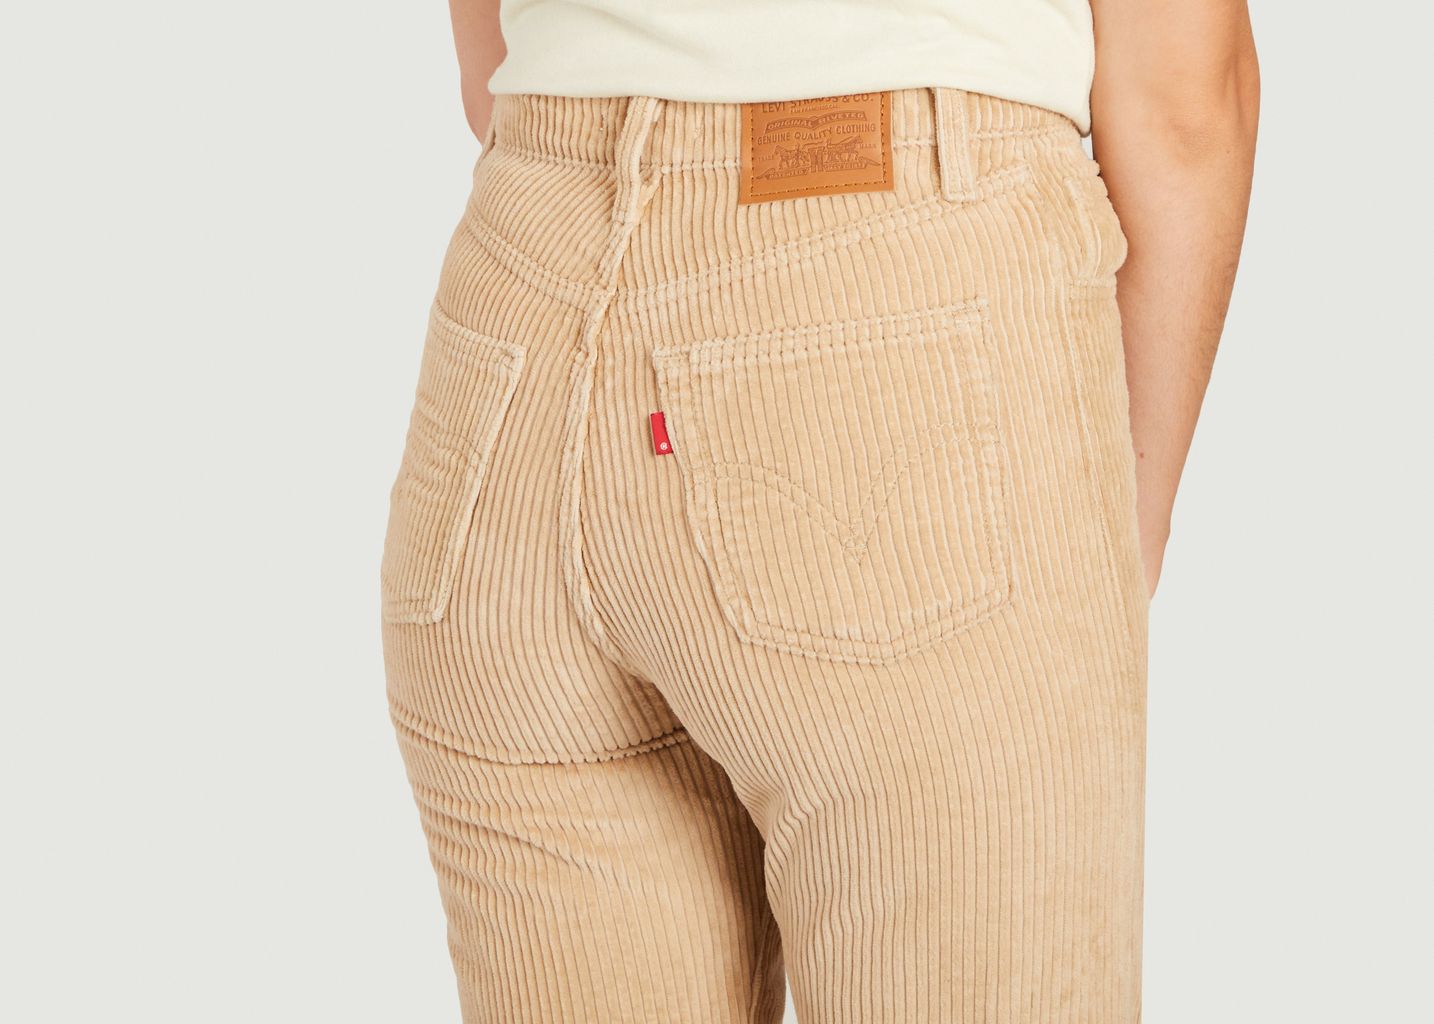 Ribcage Str Ankle Jeans - Levi's Red Tab